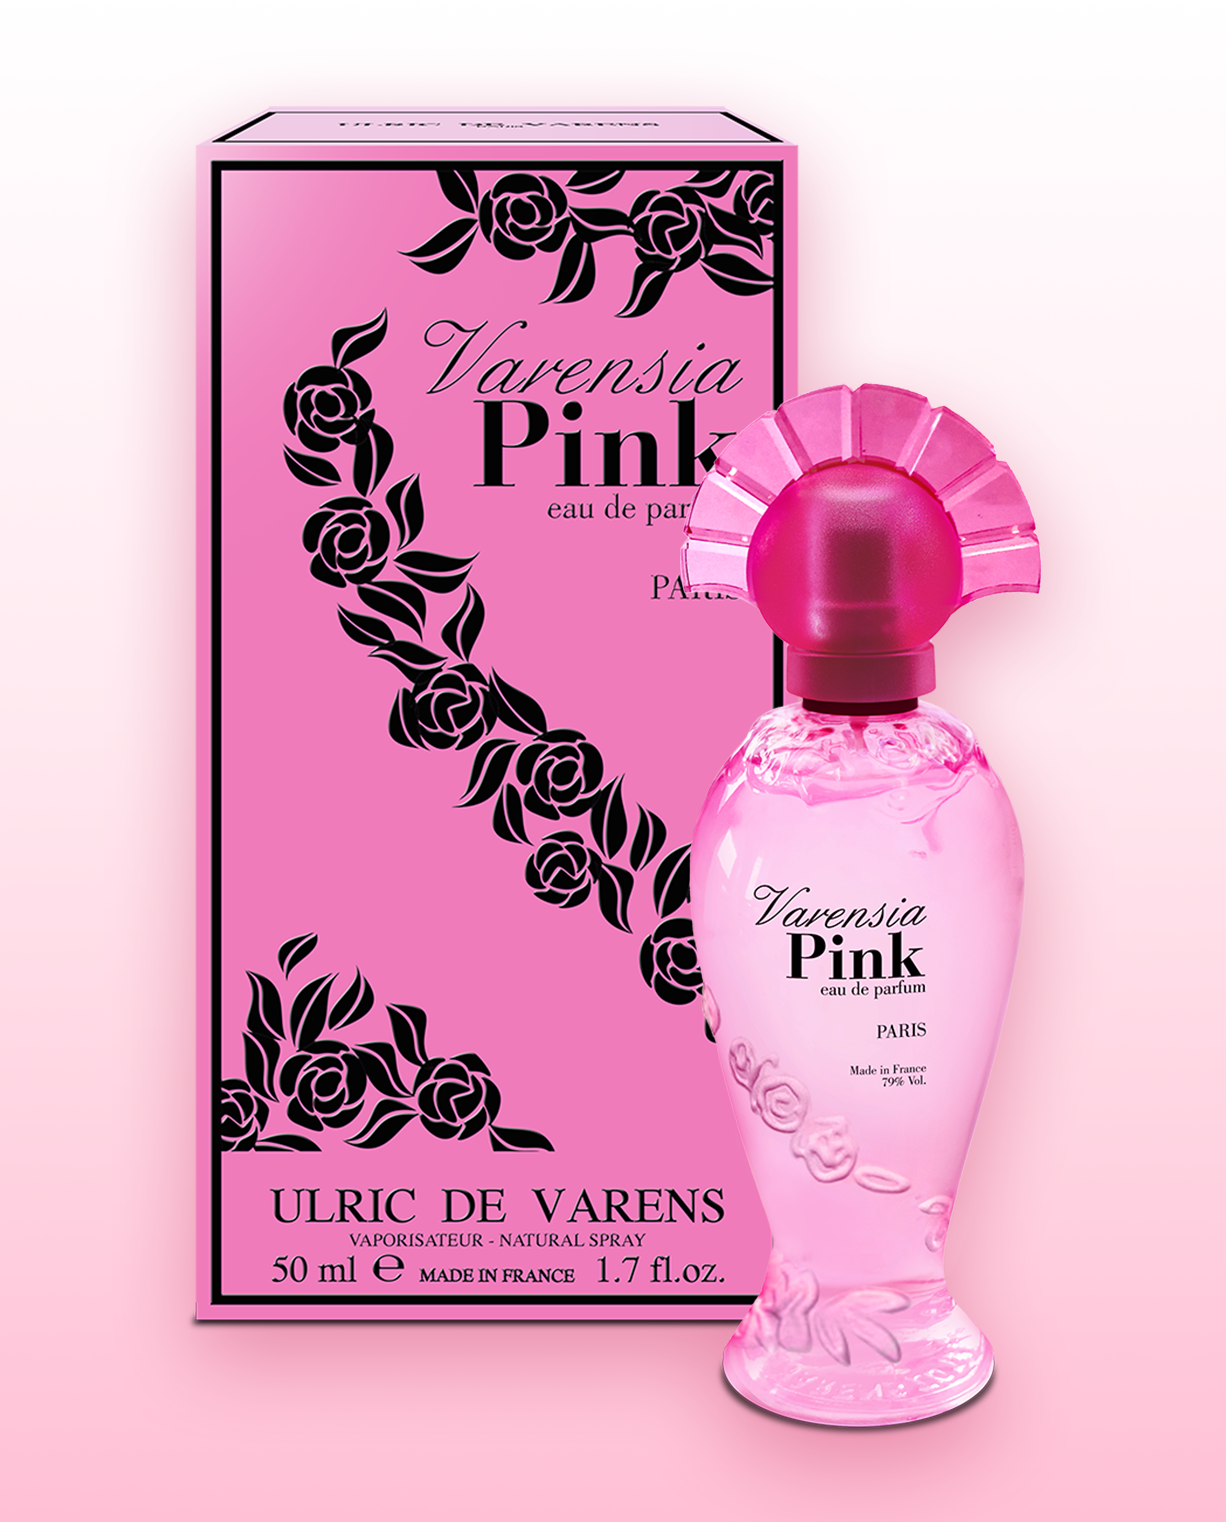 Ulric De Varens Varensia Pink For Women - Fruity and Fresh - Notes of Blackcurrant, Orange Blossom and Vanilla - Feminine and Delicious - 1.7 Fl Oz